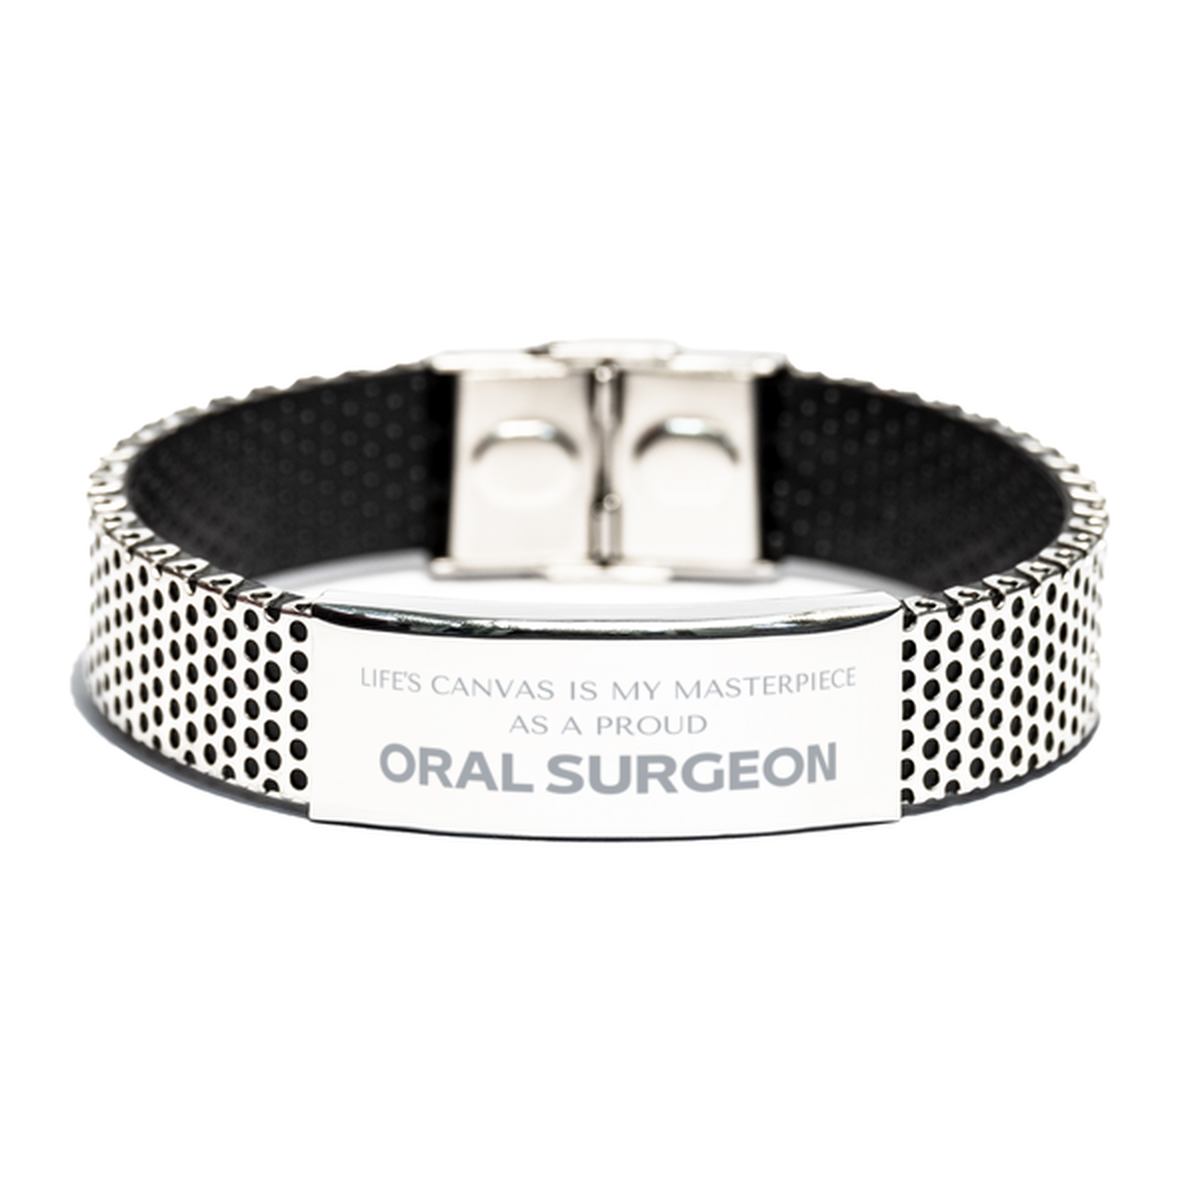 Proud Oral Surgeon Gifts, Life's canvas is my masterpiece, Epic Birthday Christmas Unique Stainless Steel Bracelet For Oral Surgeon, Coworkers, Men, Women, Friends